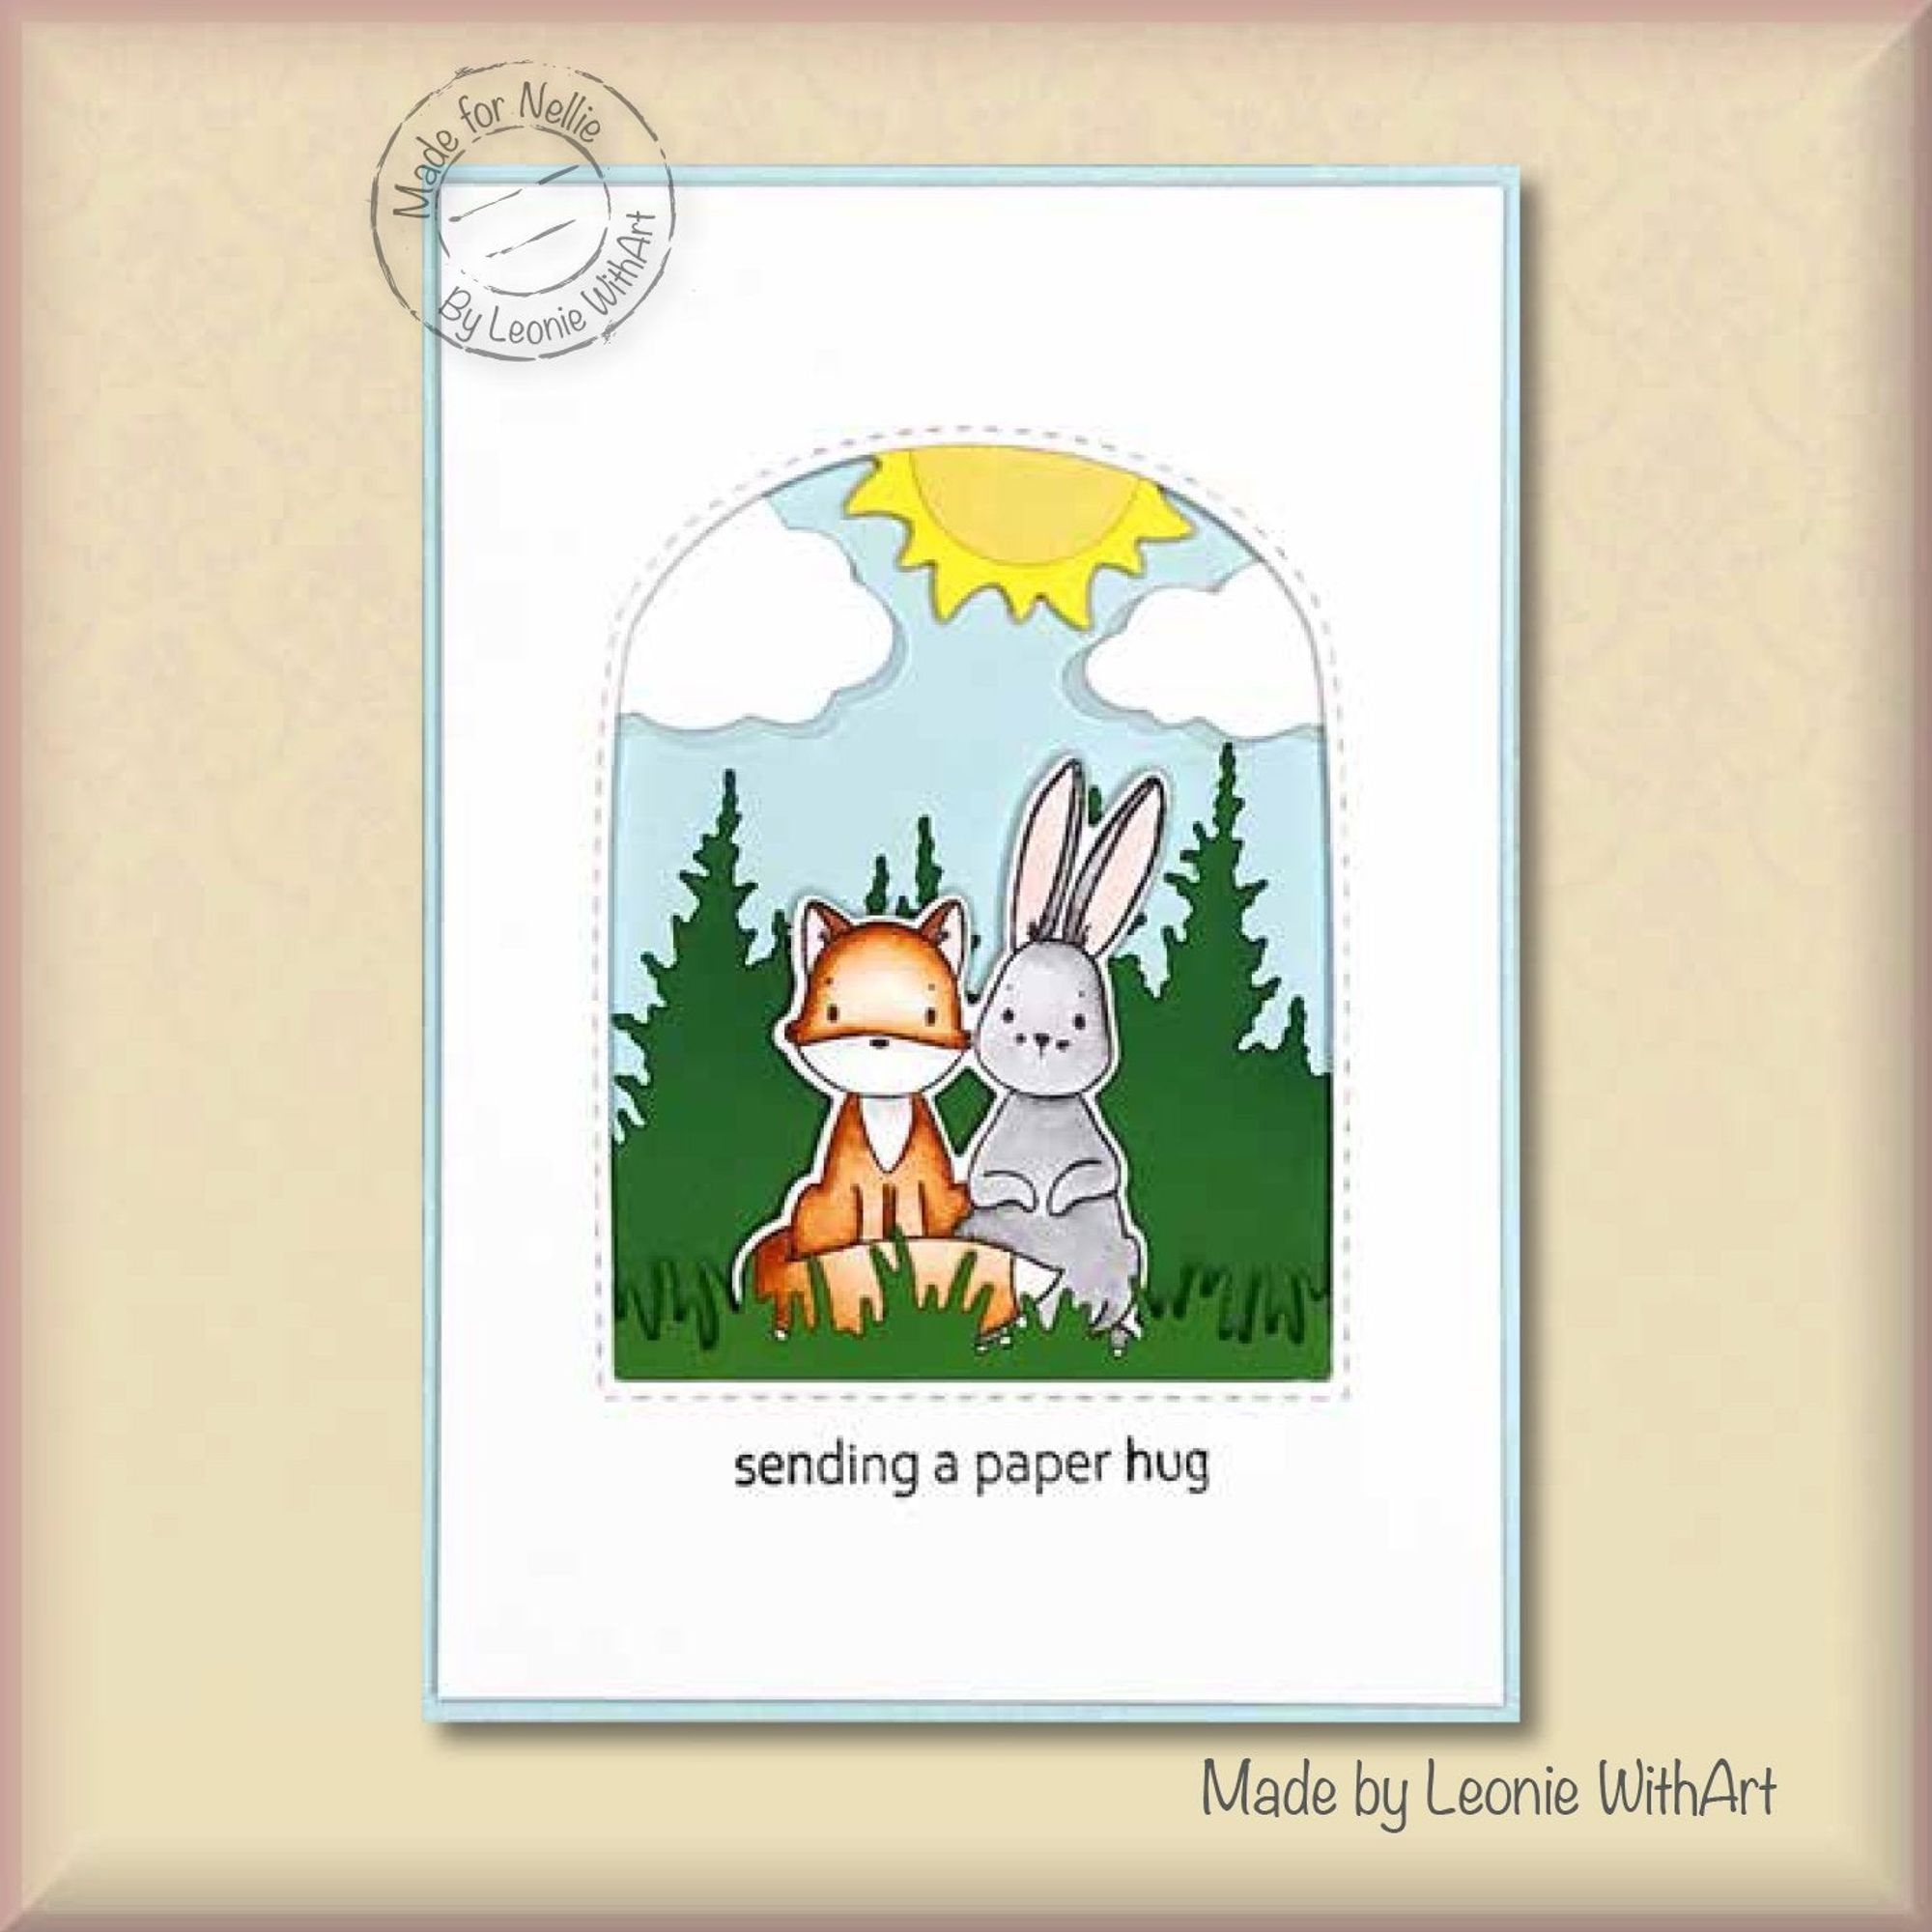 Nellie's Choice Clear Stamp Forest Friends-Friends Forever